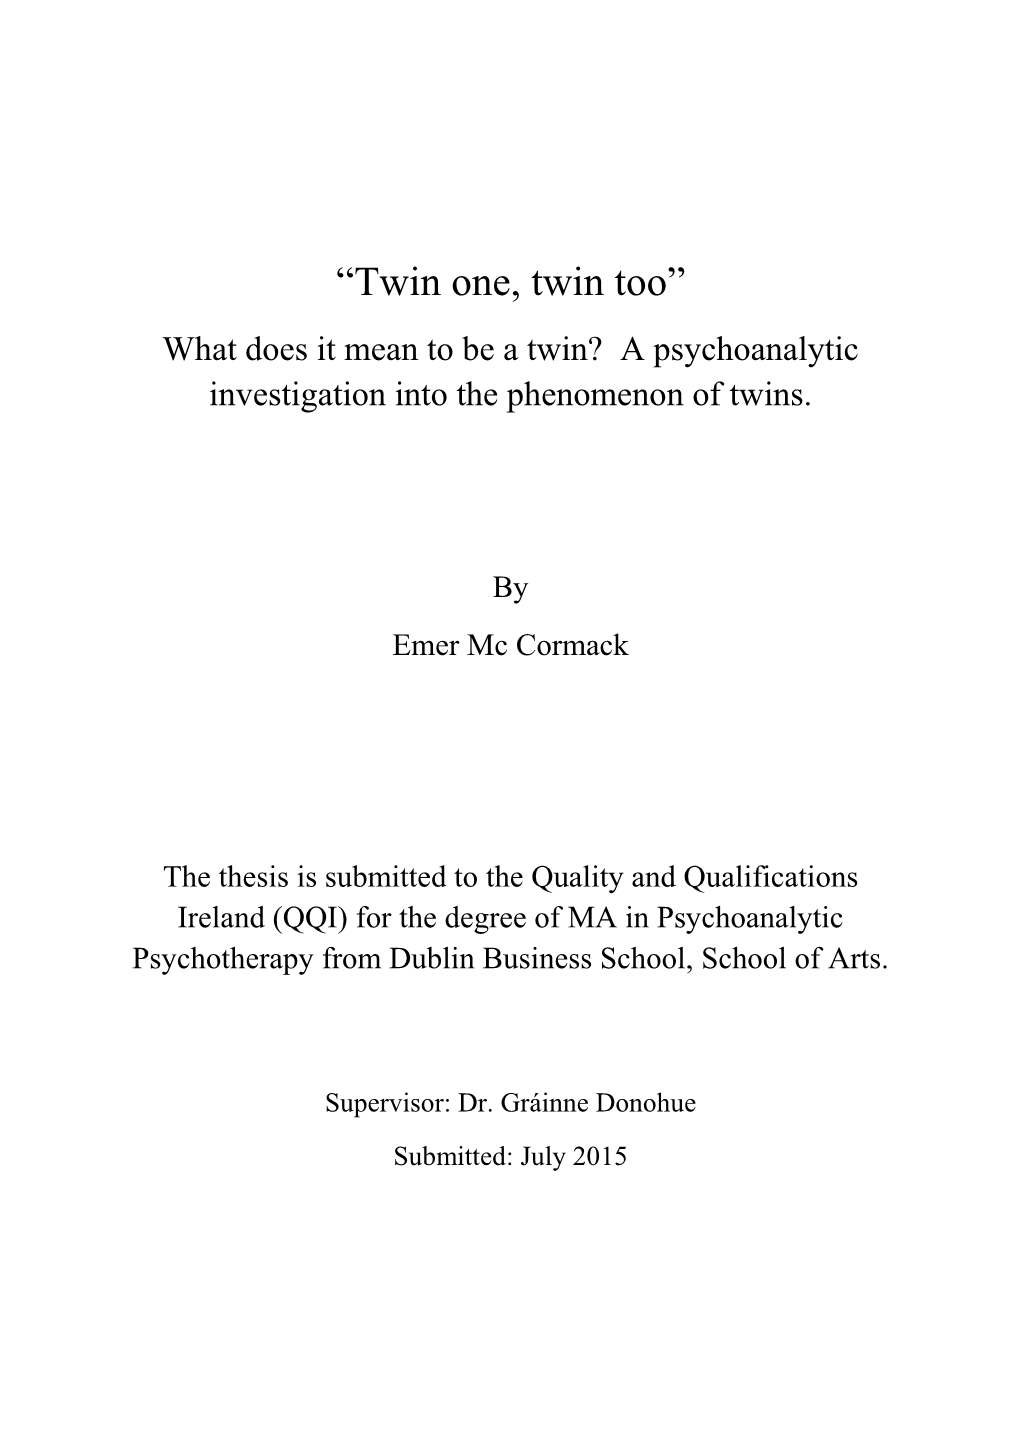 “Twin One, Twin Too” What Does It Mean to Be a Twin? a Psychoanalytic Investigation Into the Phenomenon of Twins